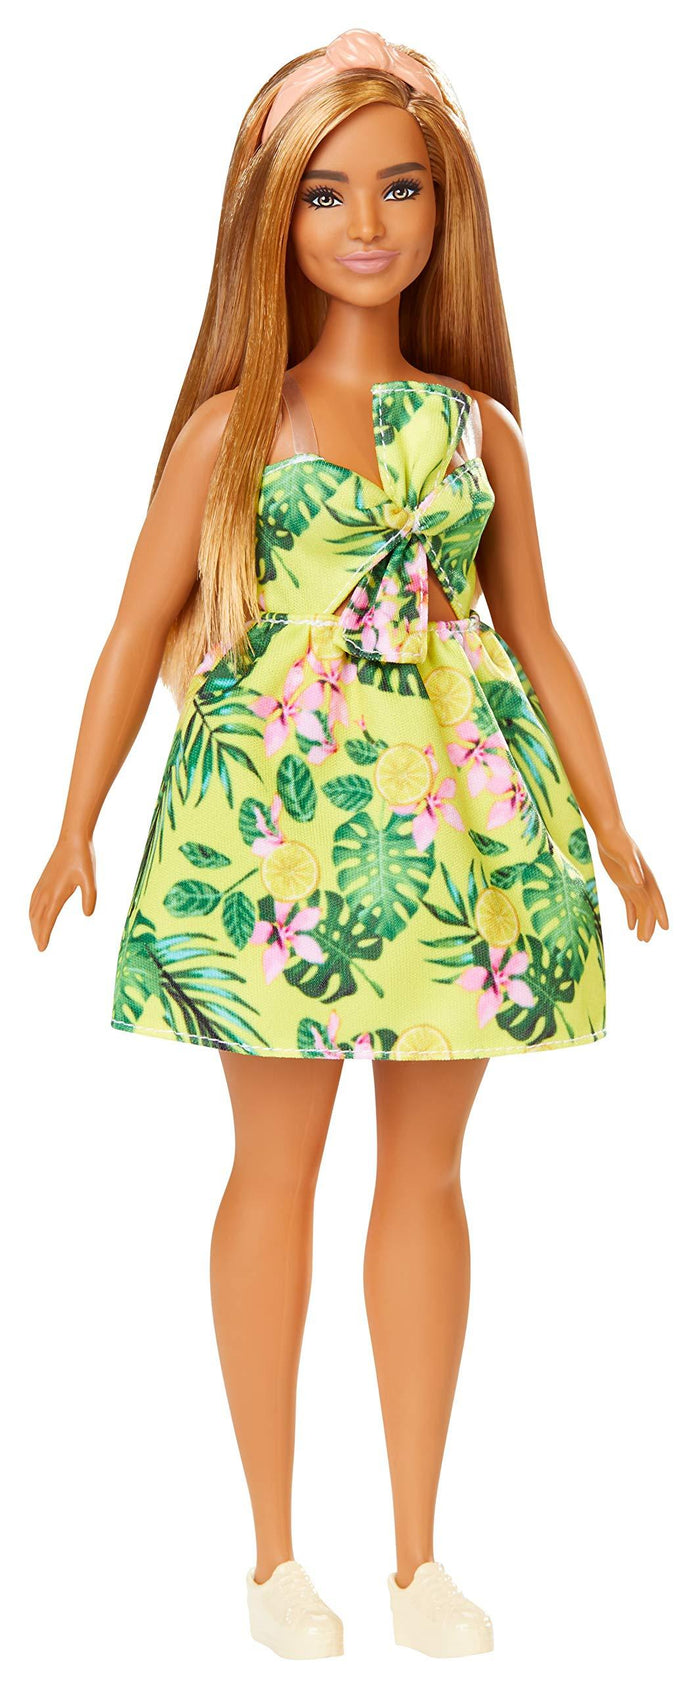 Barbie Fashionistas Doll with Long Blonde Hair - Tropical Outfit - sctoyswholesale